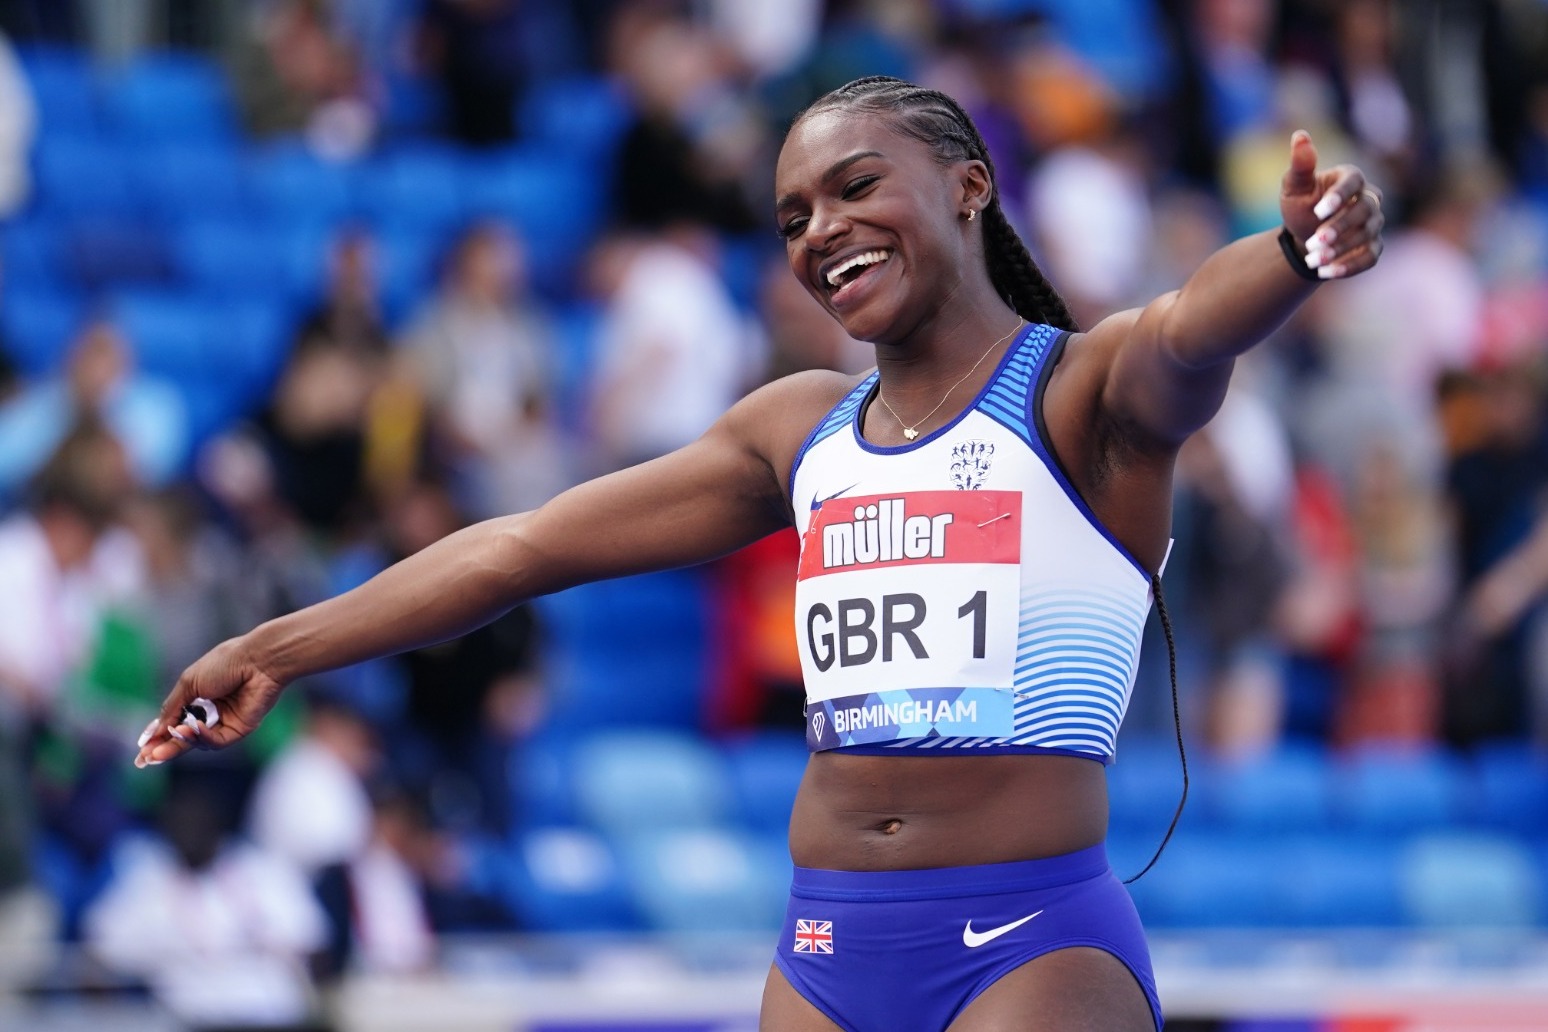 Home crowd the motivation for Dina Asher-Smith’s Birmingham bid in hectic summer 